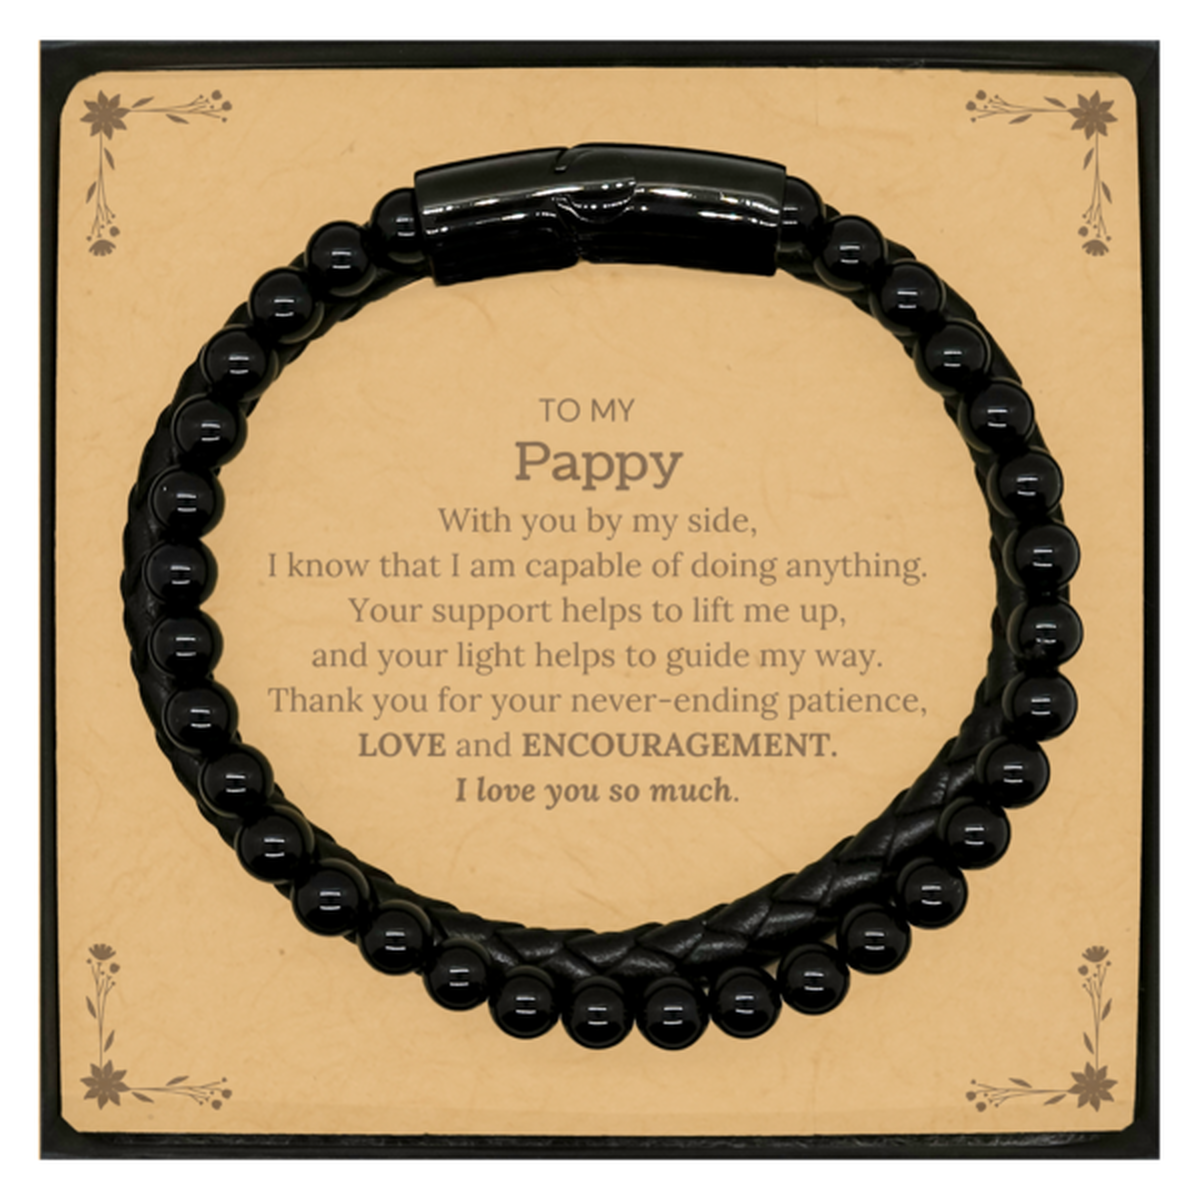 Appreciation Pappy Stone Leather Bracelets Gifts, To My Pappy Birthday Christmas Wedding Keepsake Gifts for Pappy With you by my side, I know that I am capable of doing anything. I love you so much